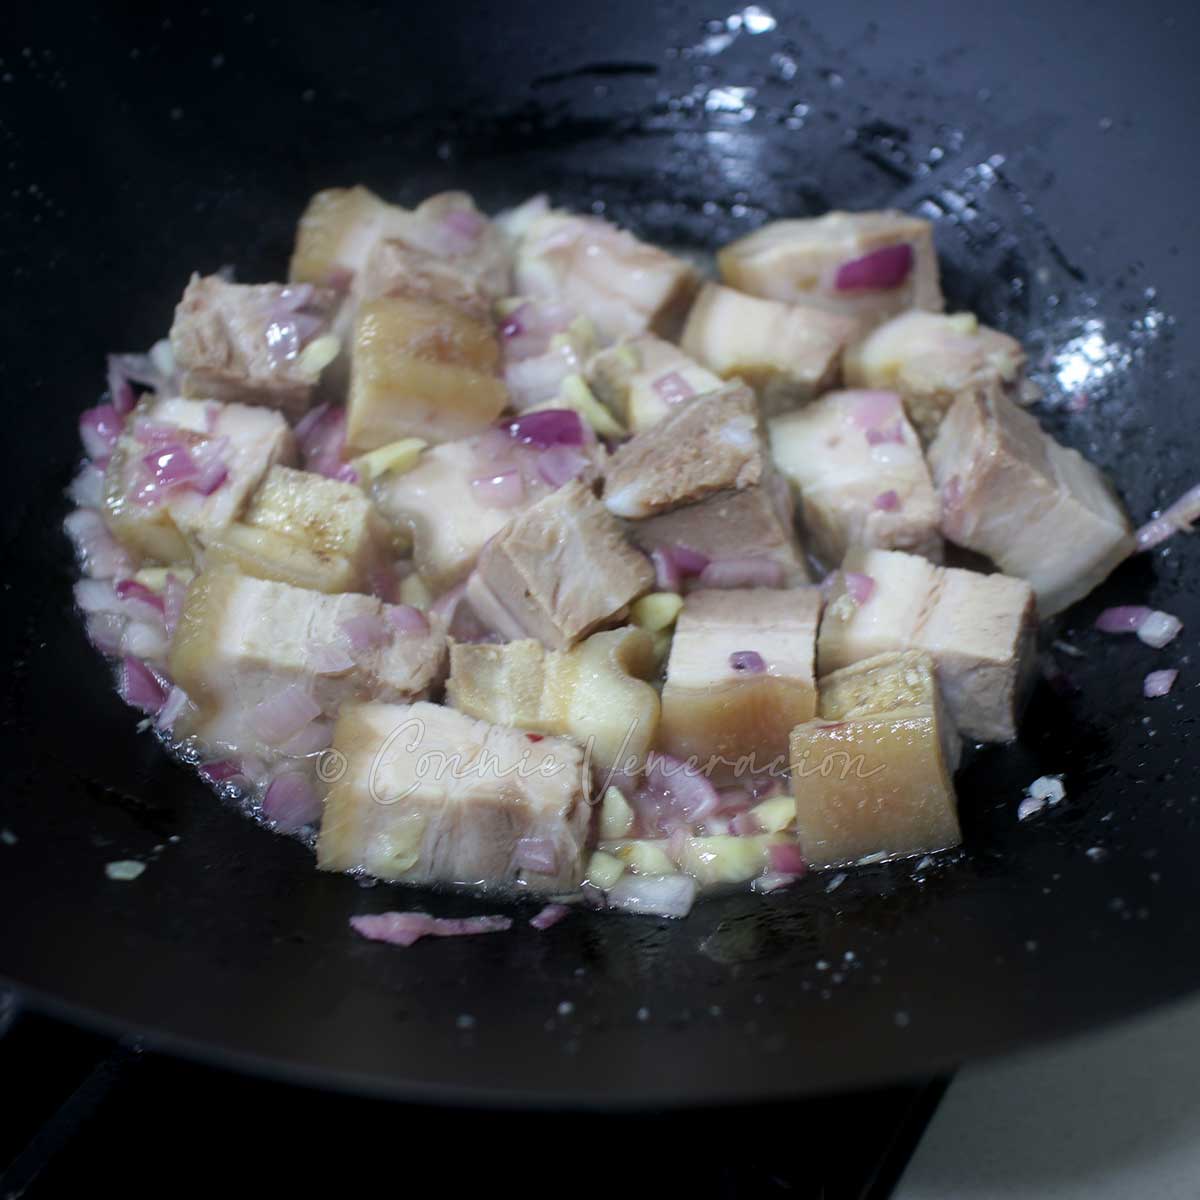 Sauteeing parboiled pork with shallots and garlic